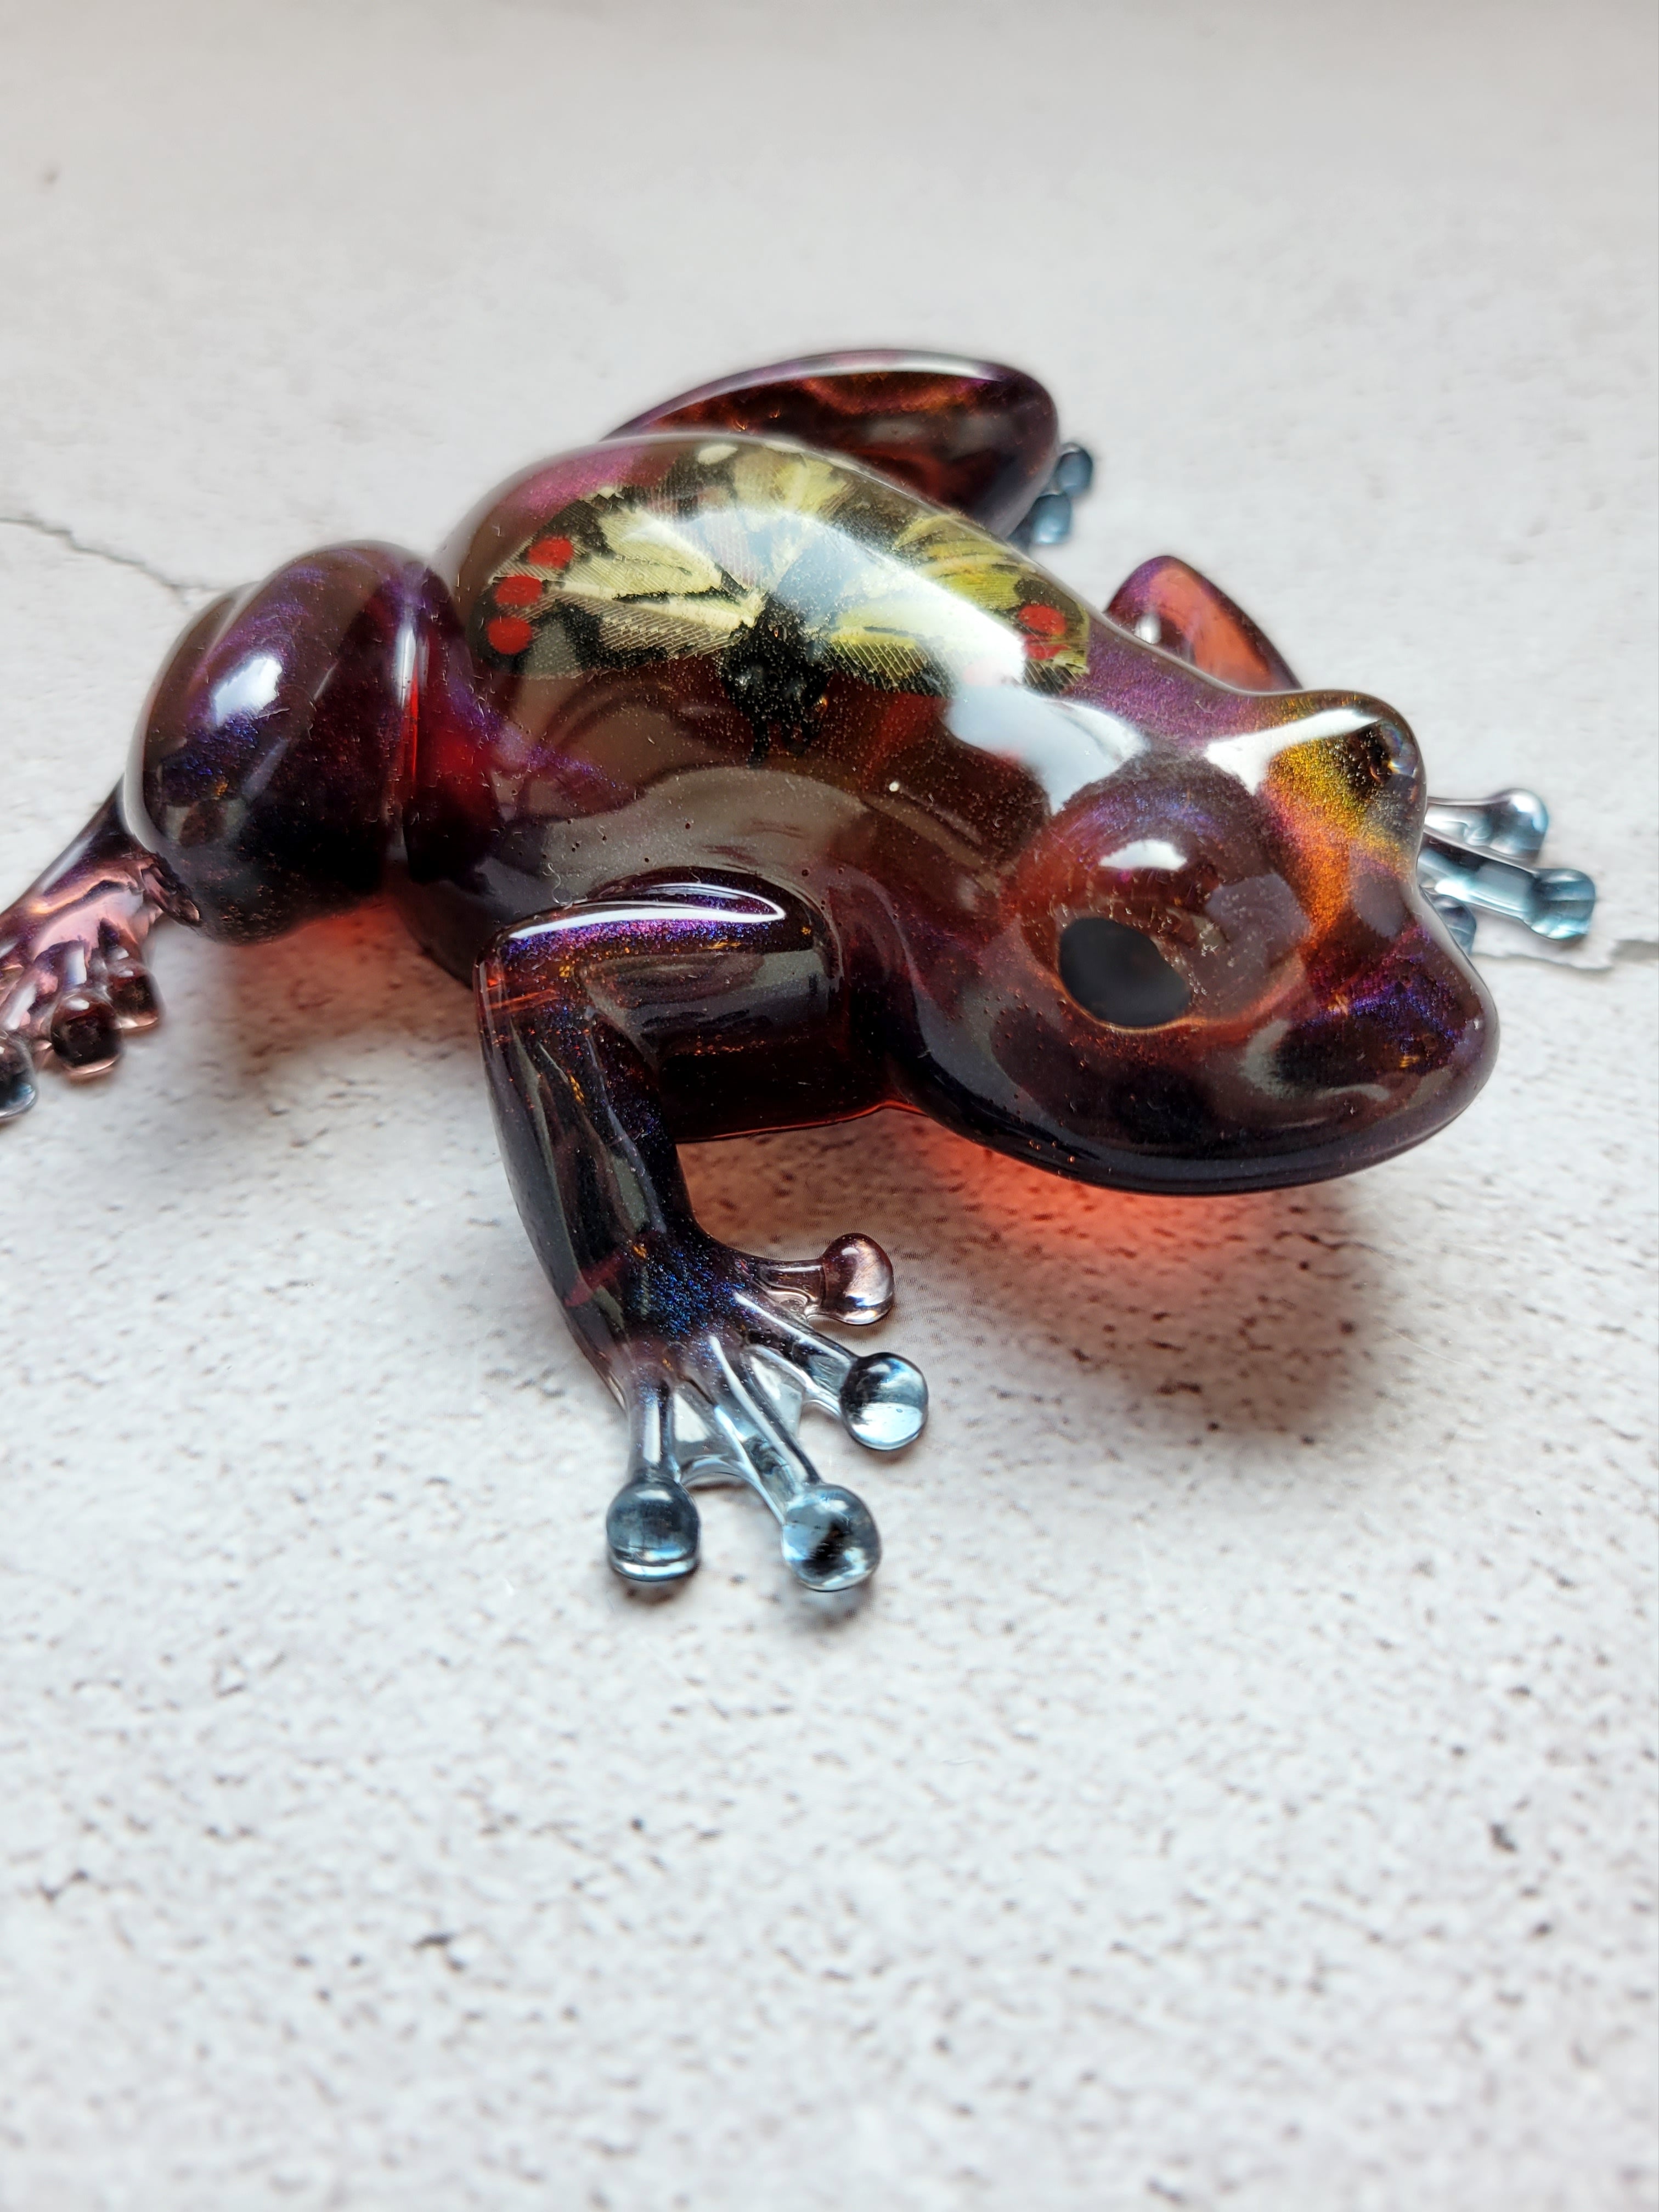 frog resin with a paper yellow butterfly inside. The frog is color shifting with blues and reds and purples. Front face view